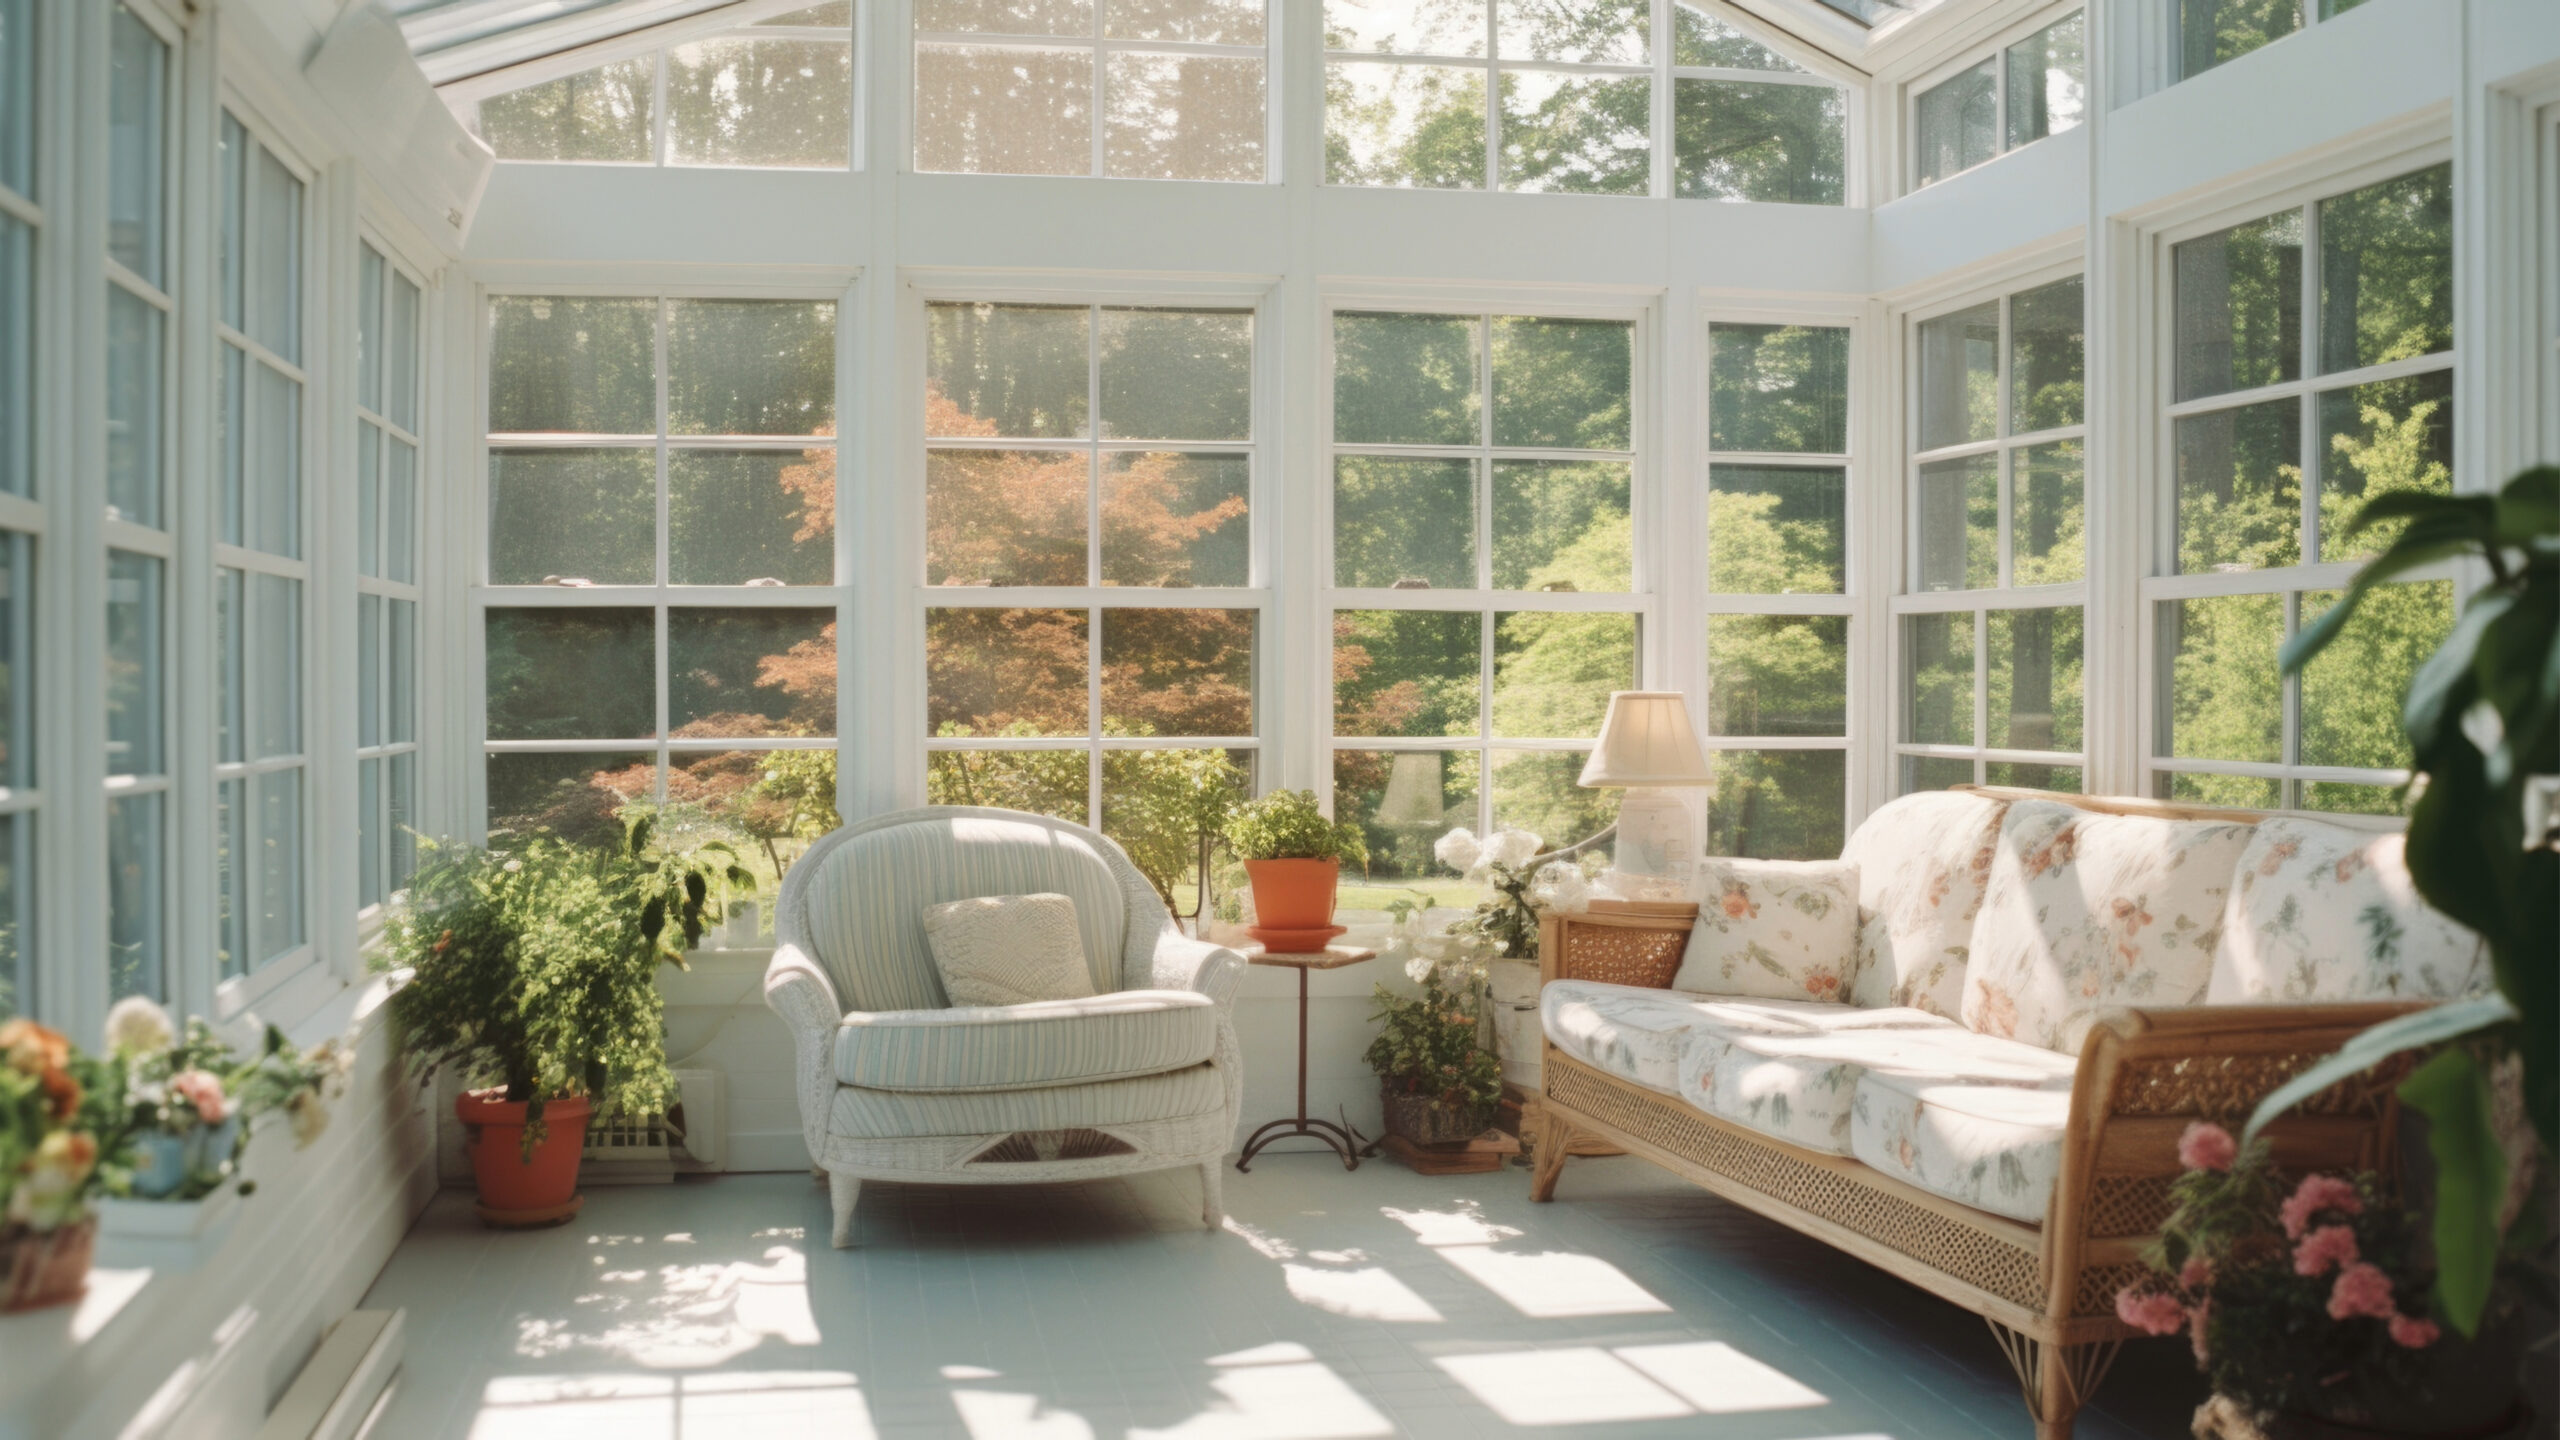 A sunroom with white windows and white furniture